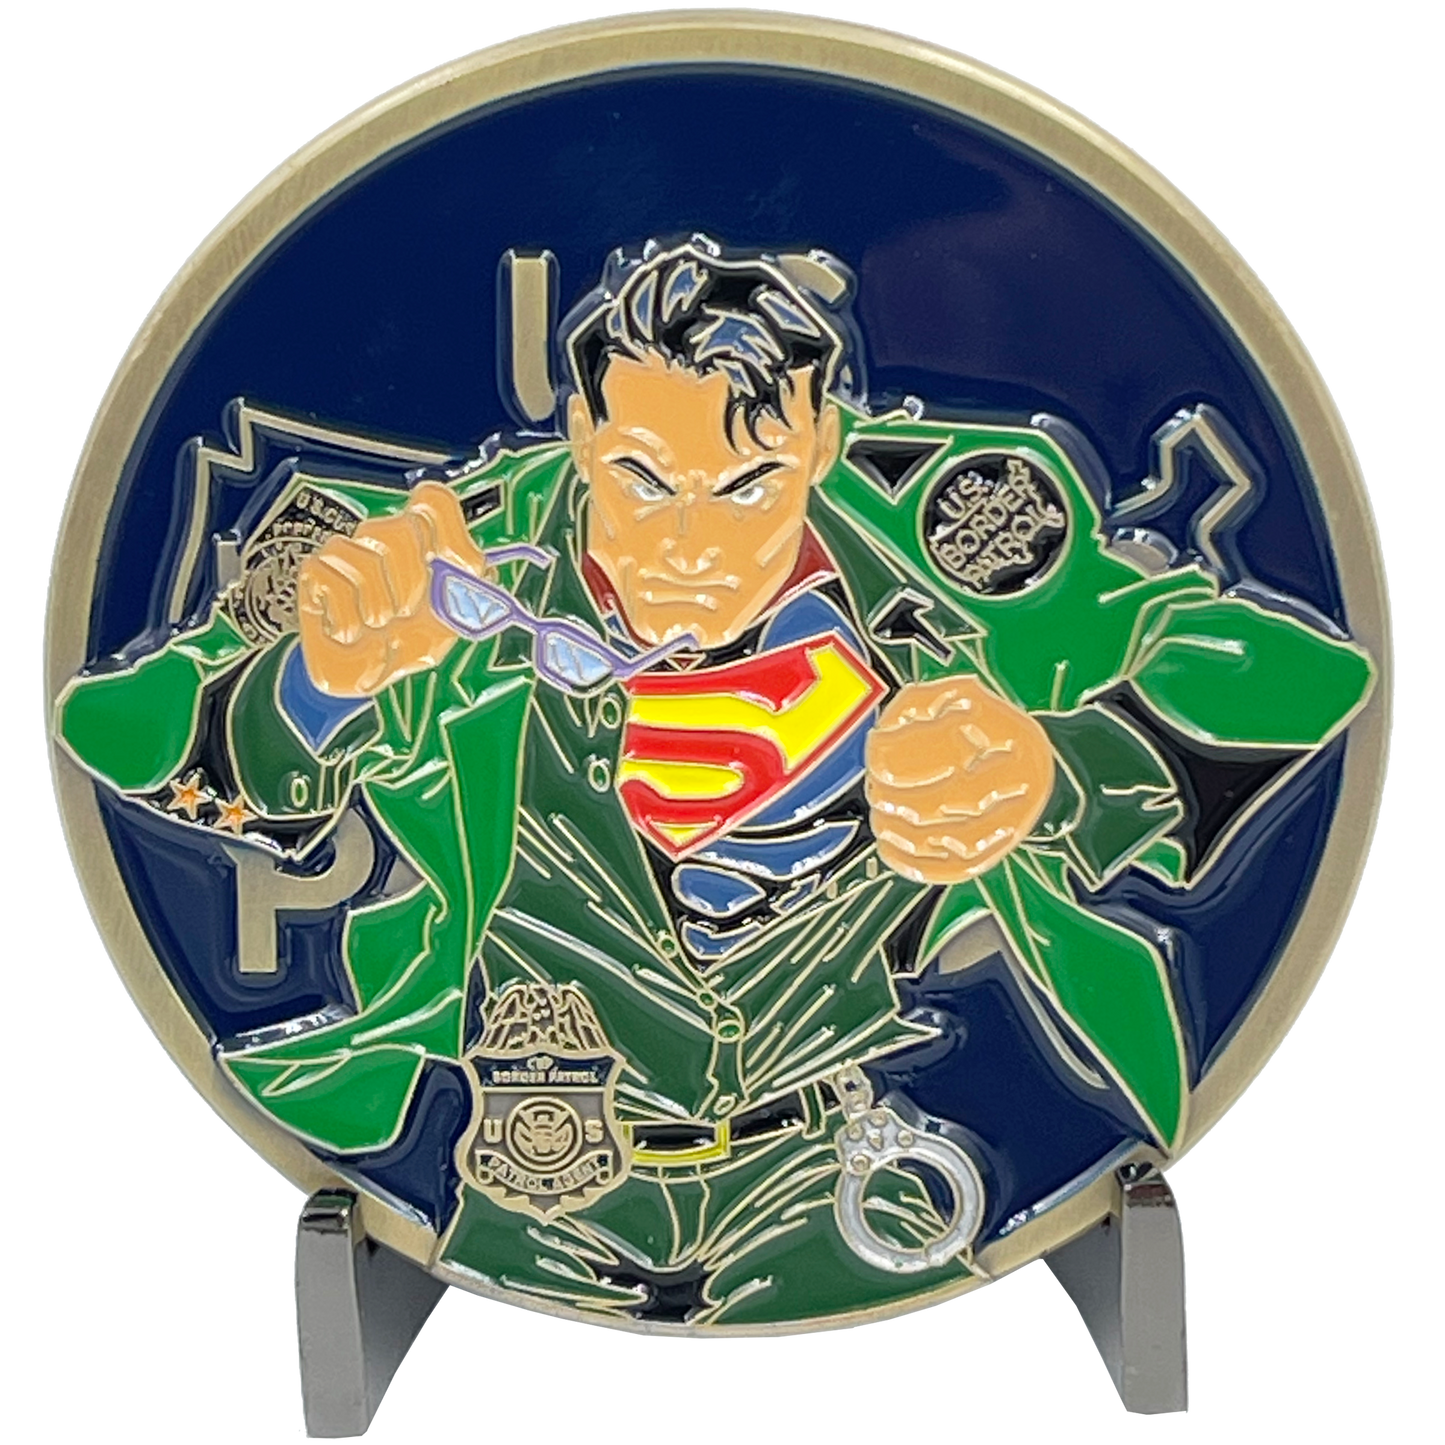 BL6-010 CBP Officer and Border Patrol Agent of Steel inspired by Super Man CBPO BPA Police Federal Agent Challenge Coin